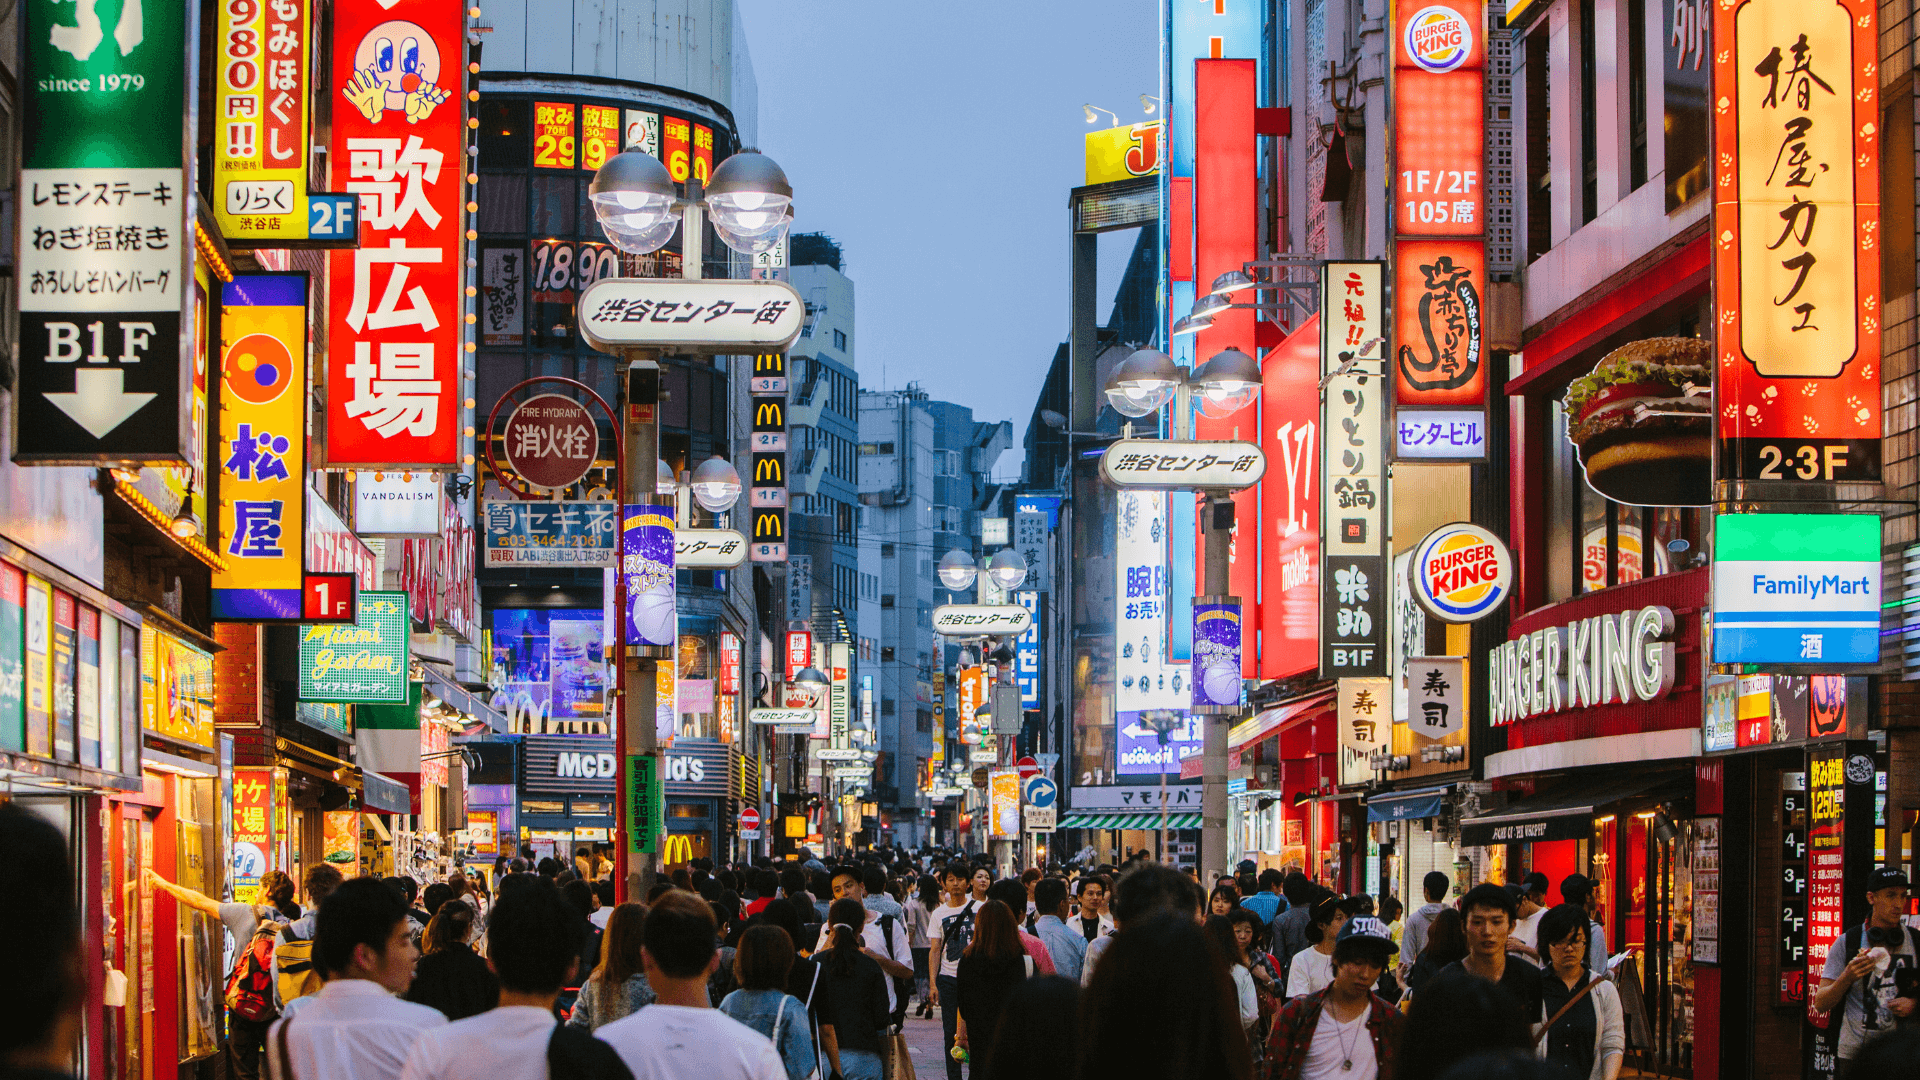 How to Make the Most of Your Trip to Tokyo